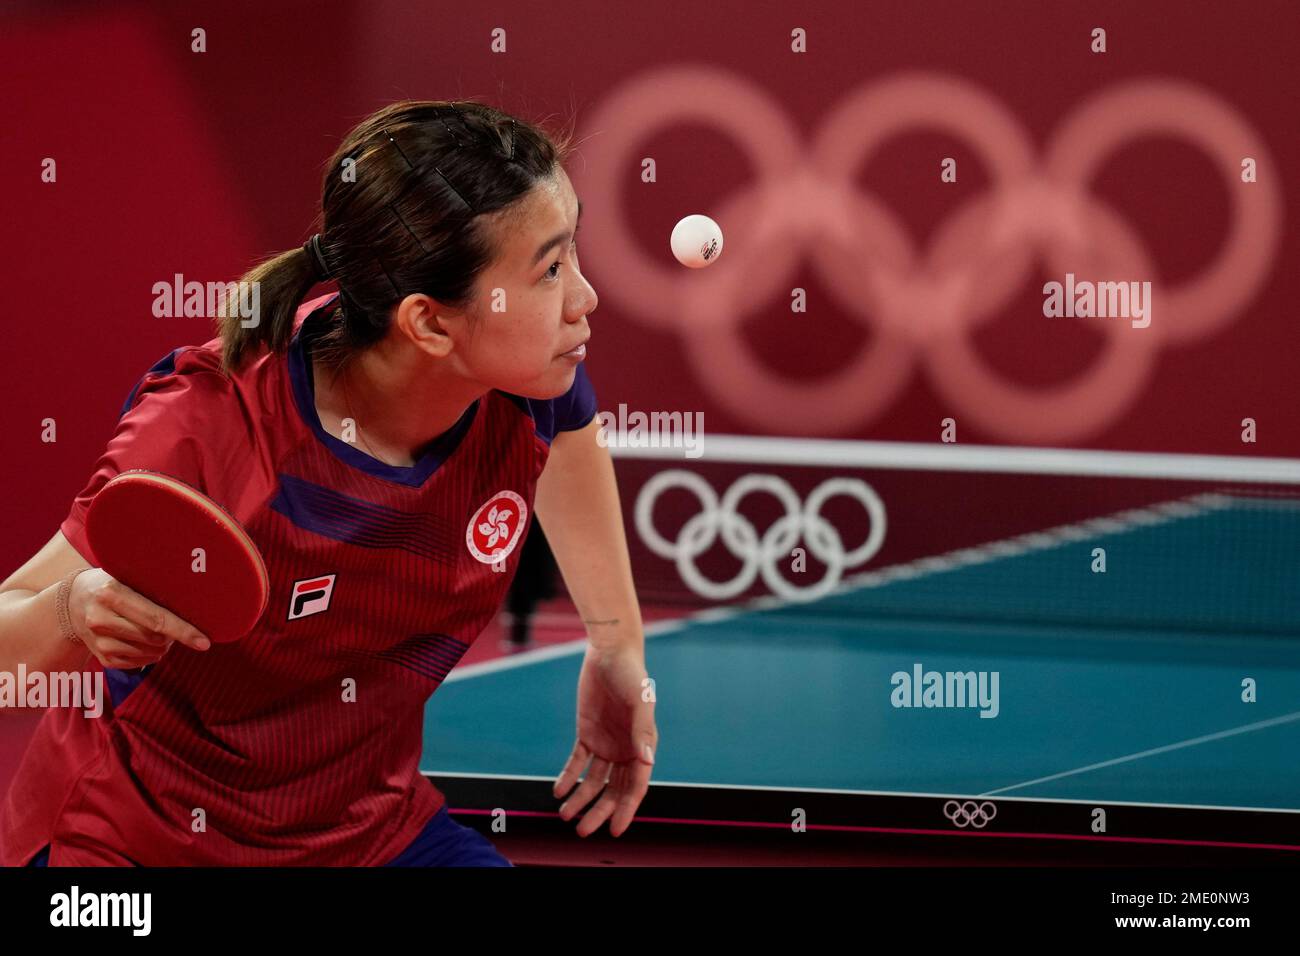 Hong Kongs Lee Ho Ching competes during the table tennis semi final womens team match against Japans Miu Hirano at the 2020 Summer Olympics, Tuesday, Aug